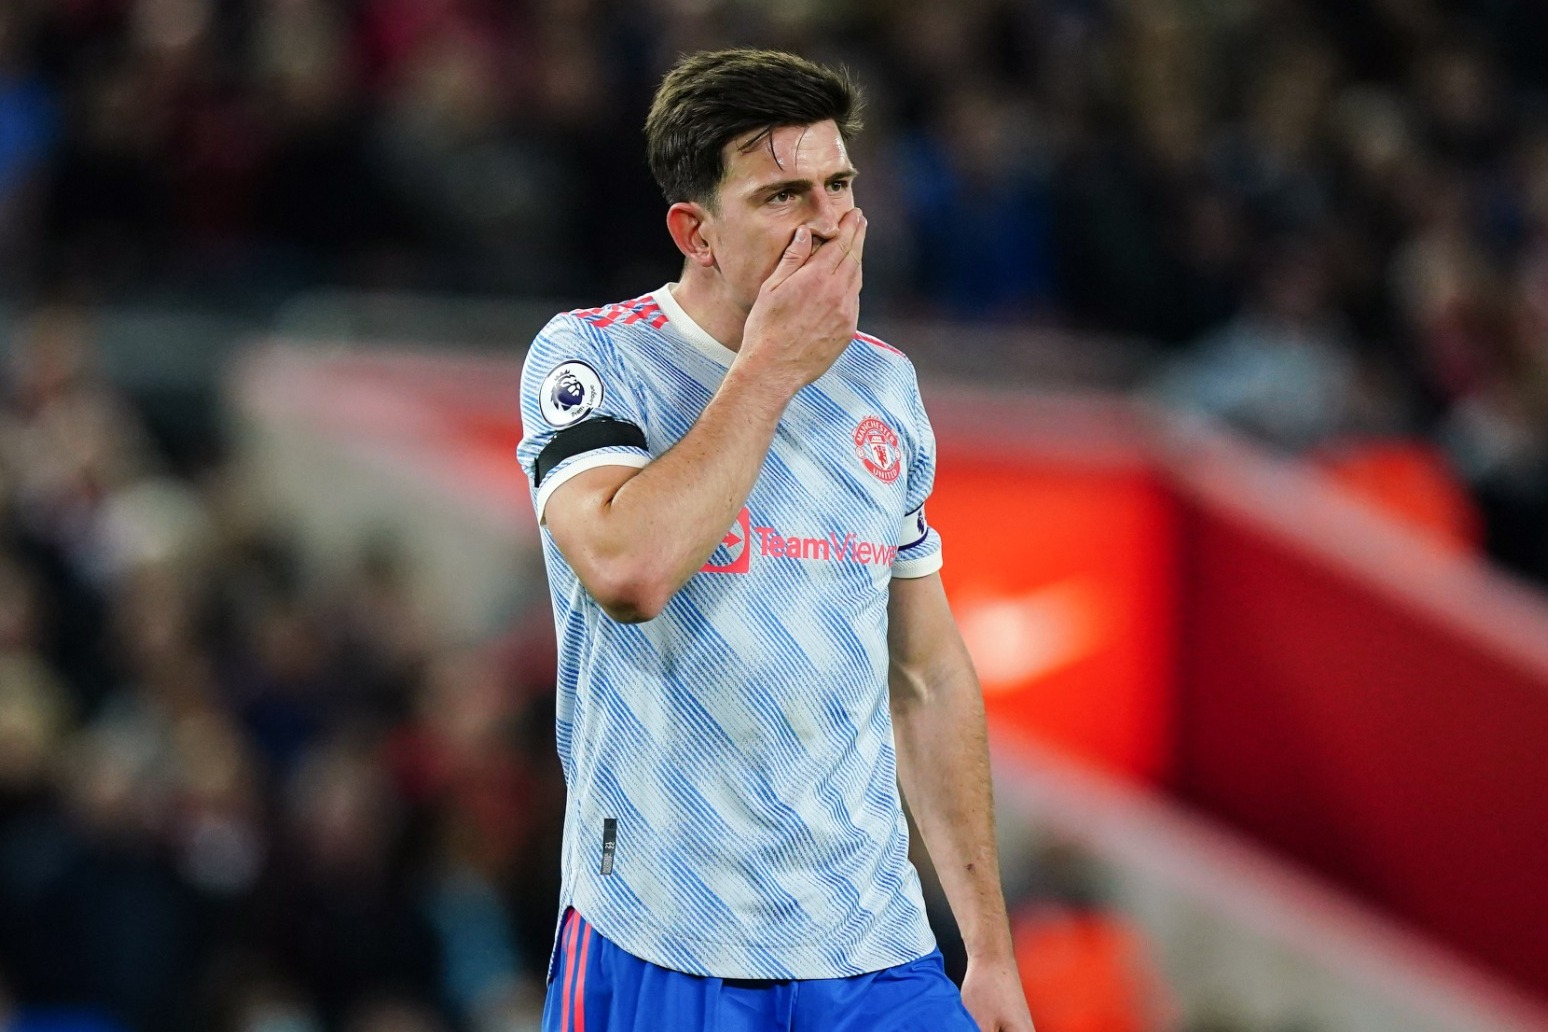 Police investigate after Harry Maguire receives bomb threat 